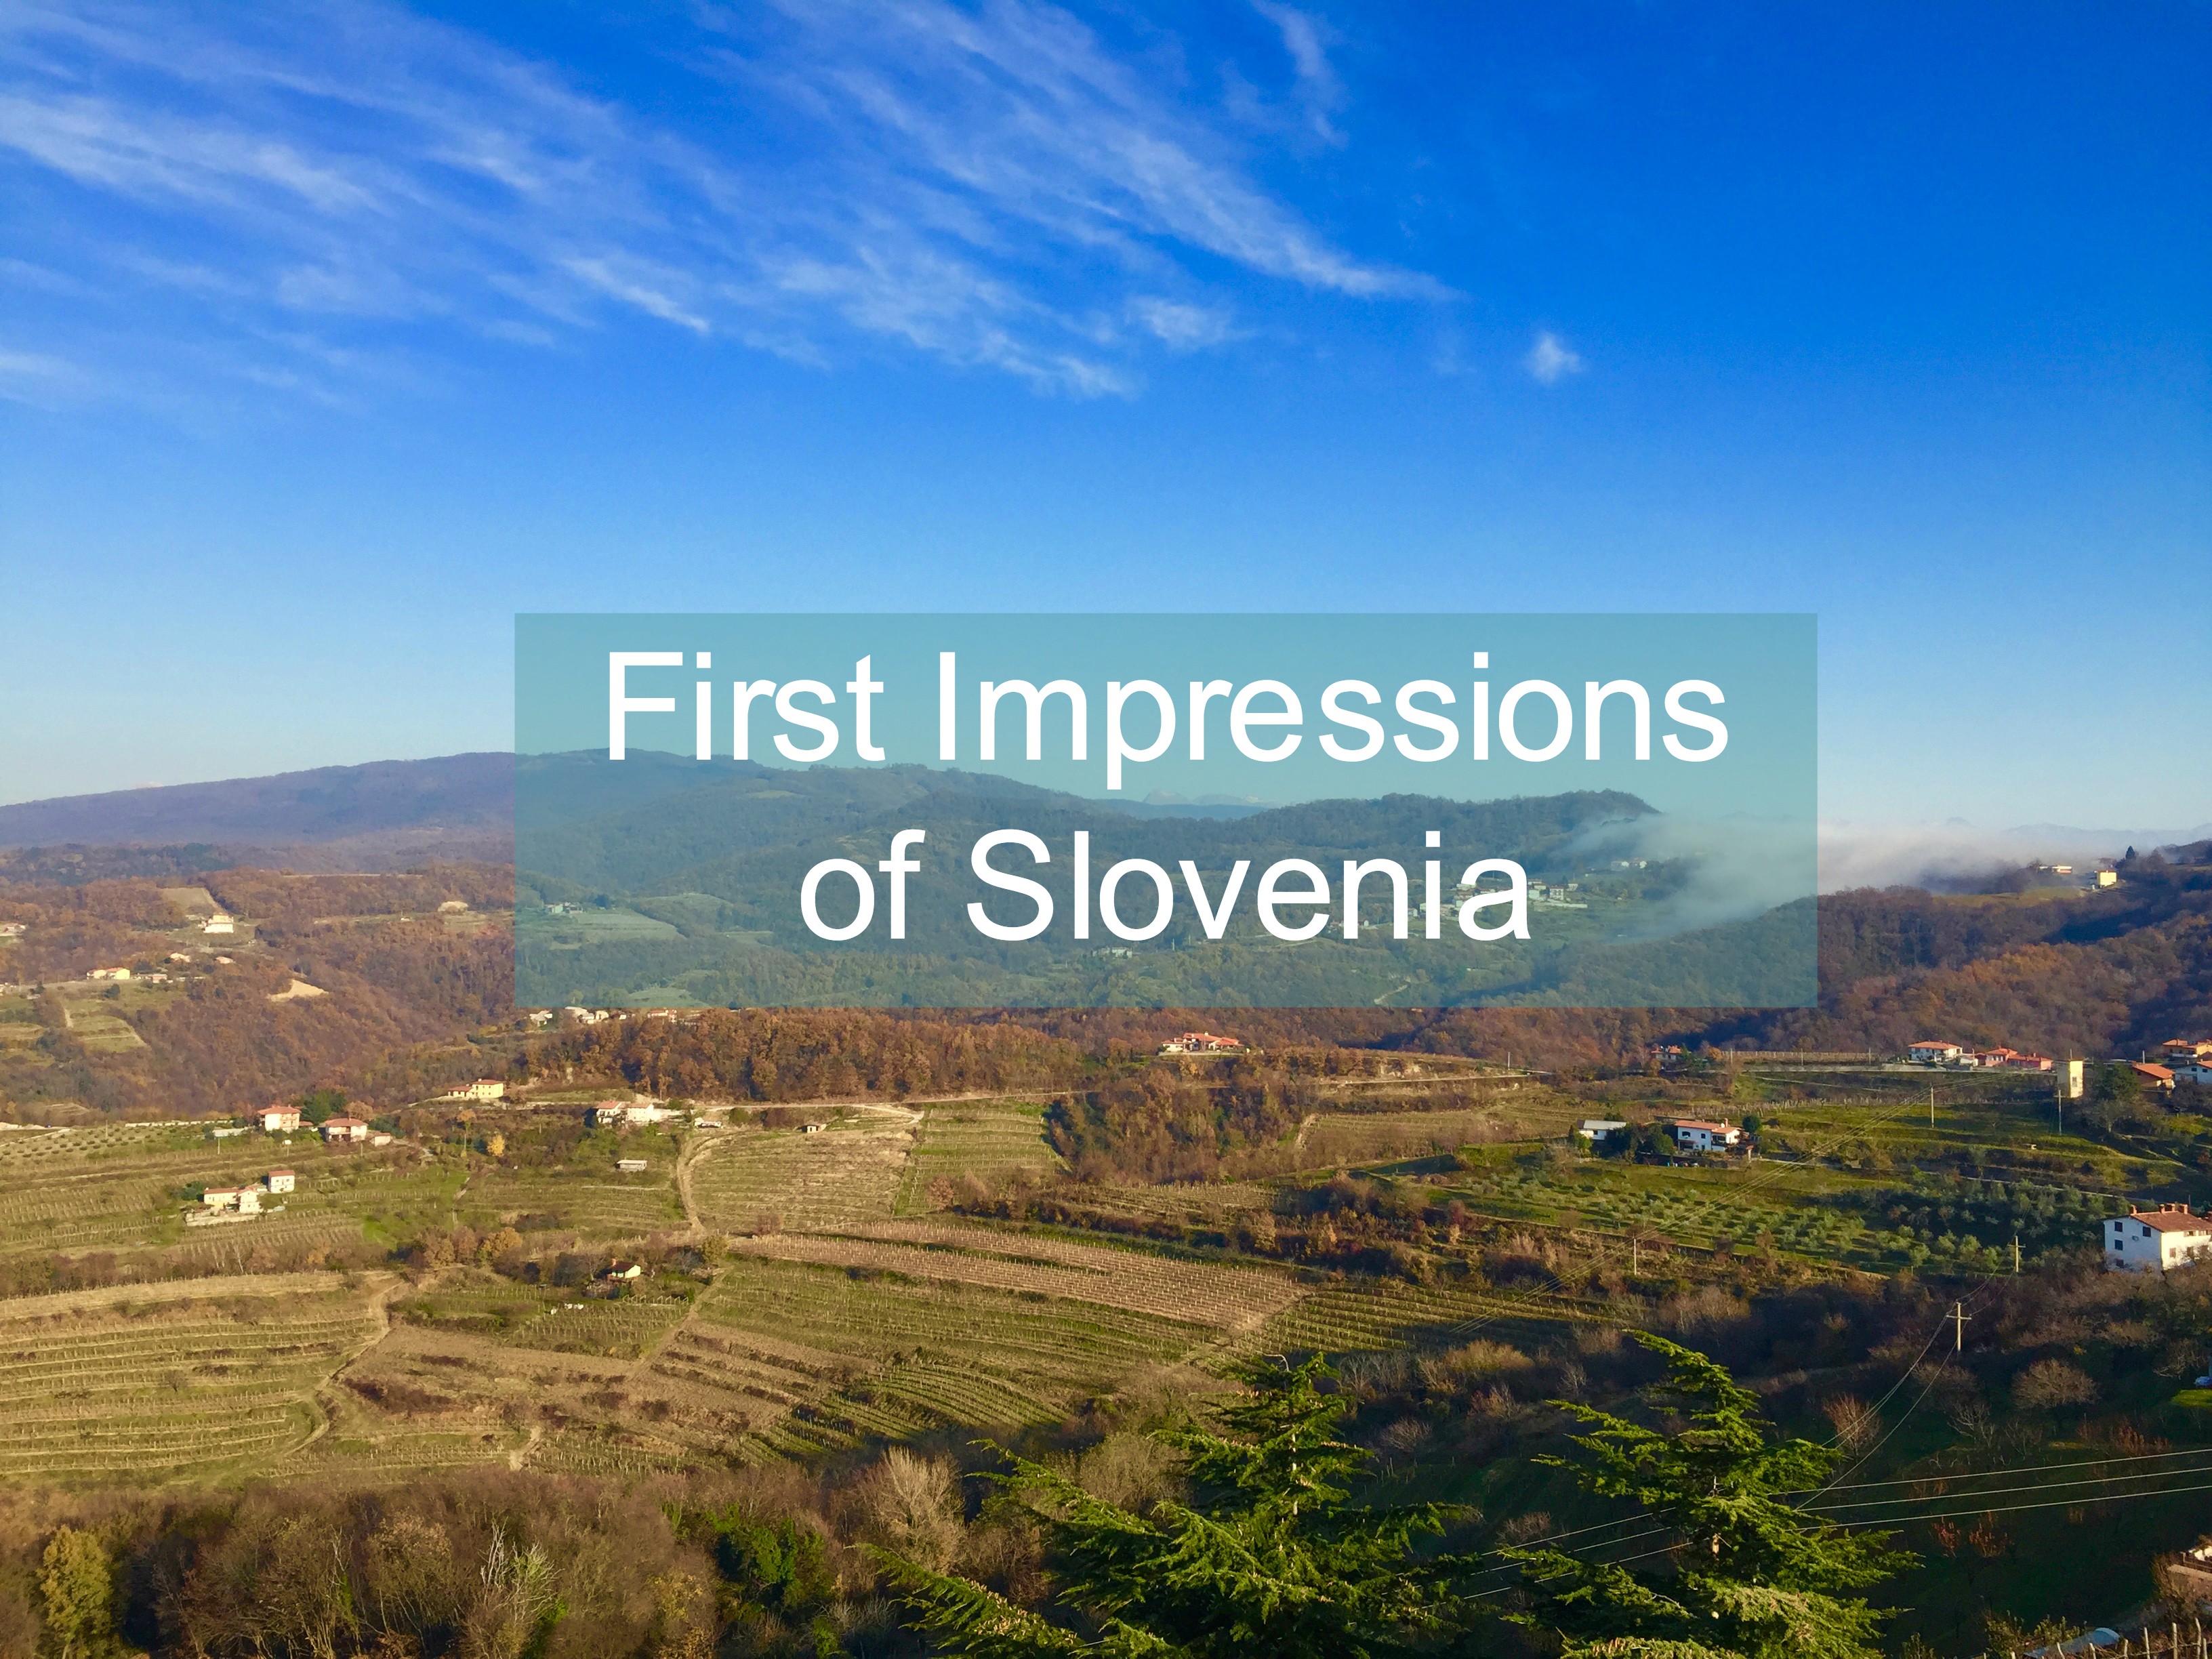 First impressions of Slovenia